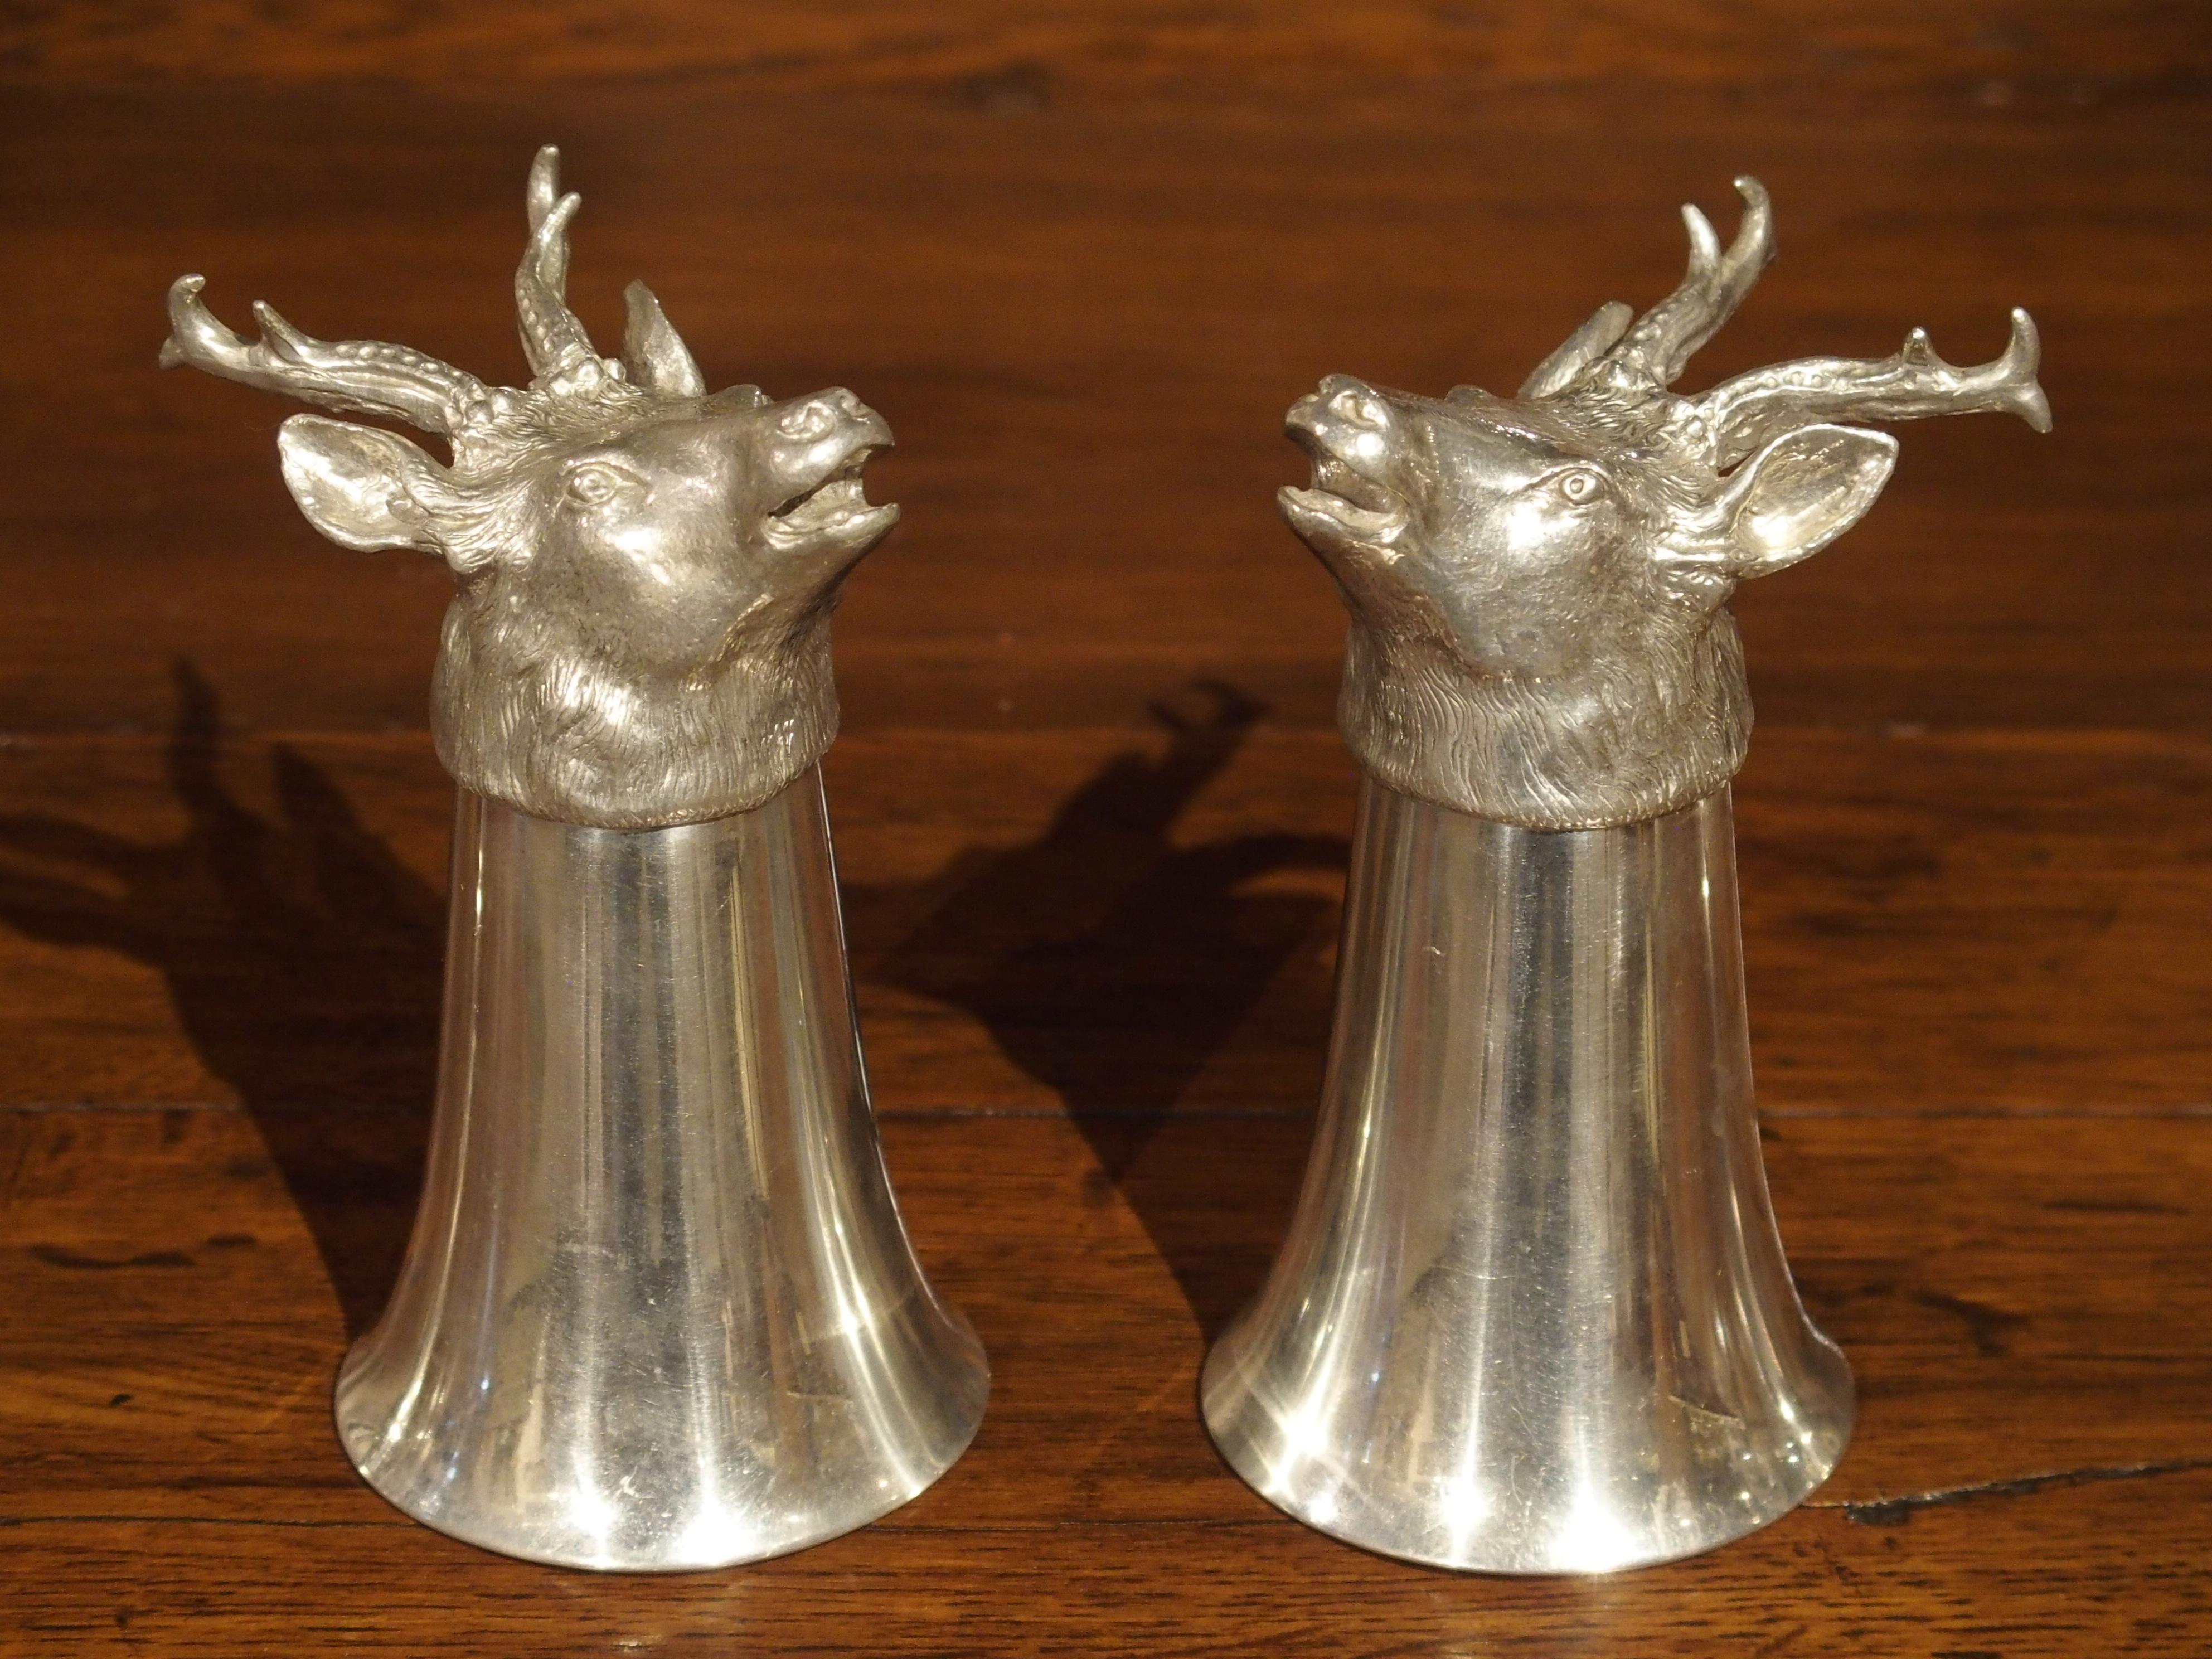 https://a.1stdibscdn.com/set-of-4-polished-pewter-stag-and-ibex-stirrup-cups-with-ice-bucket-for-sale-picture-2/f_9063/f_210103921602797466612/BucketStirrupCups720_34_1__master.JPG